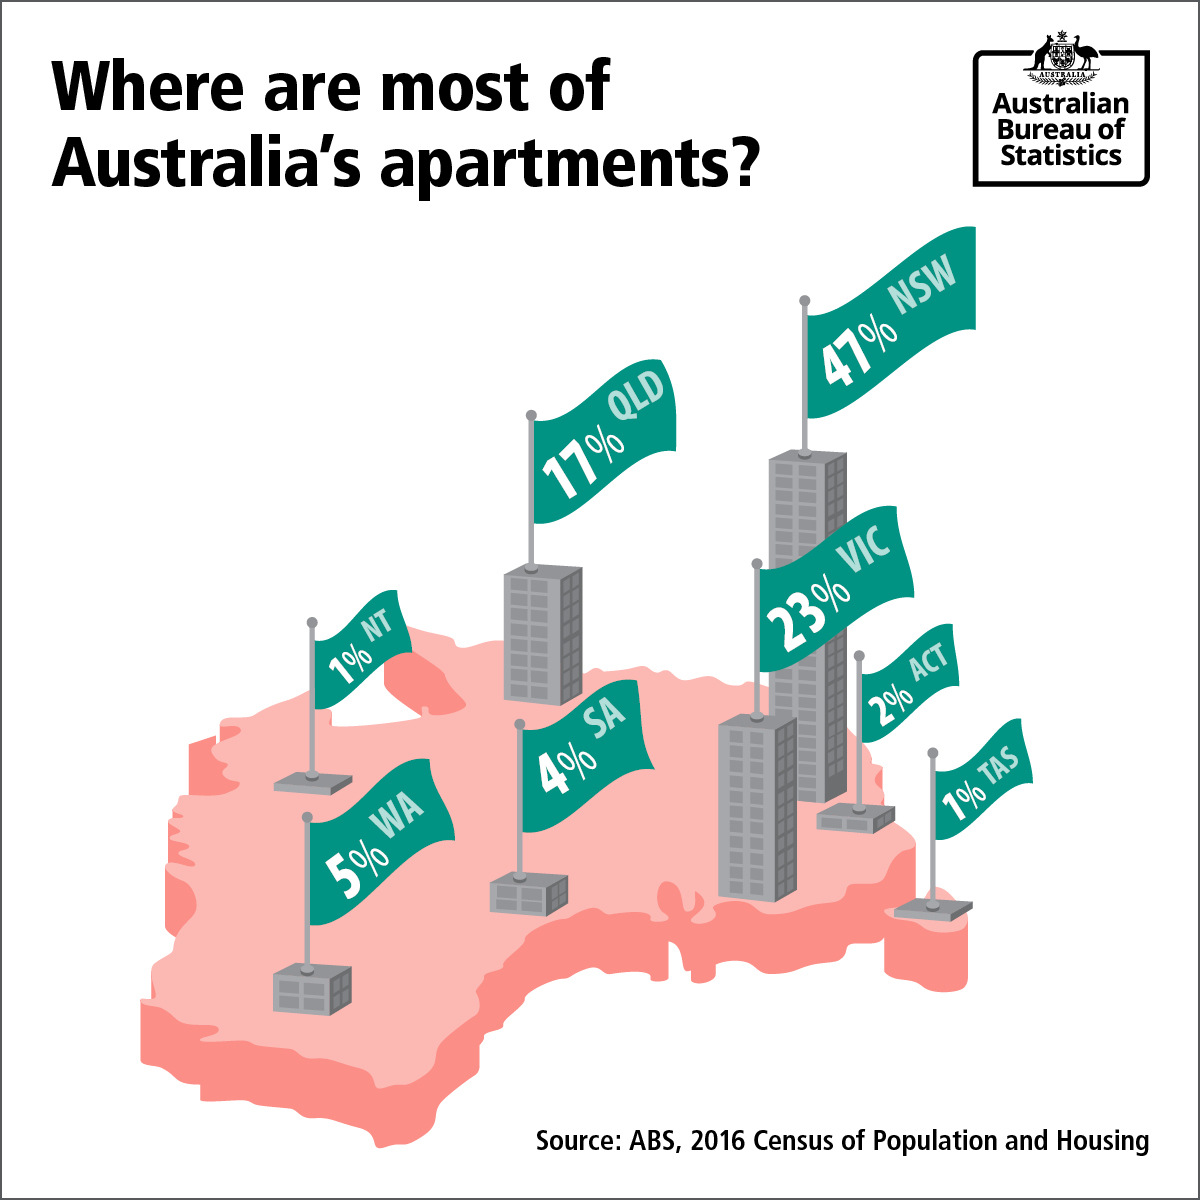 Australian Bureau Of Statistics On Twitter The Next Census Is Less Than A Year Away The Last Census In 2016 Showed That Nearly Half Of The Occupied Apartments In Australia Are In